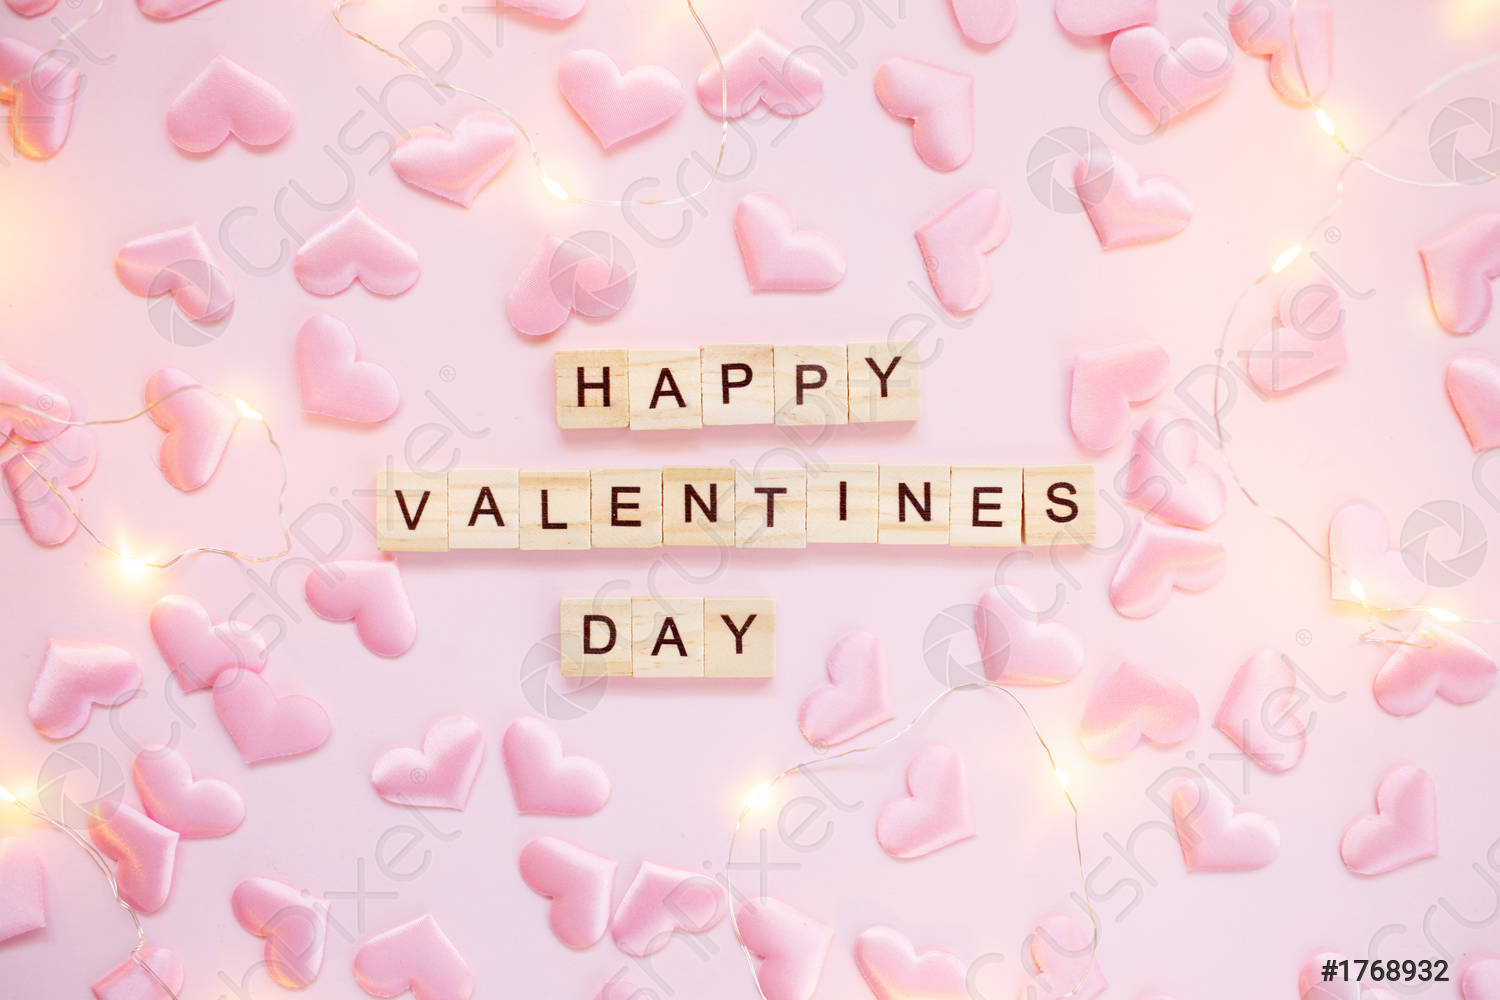 Confetti heart and lights on a pink pastel background with